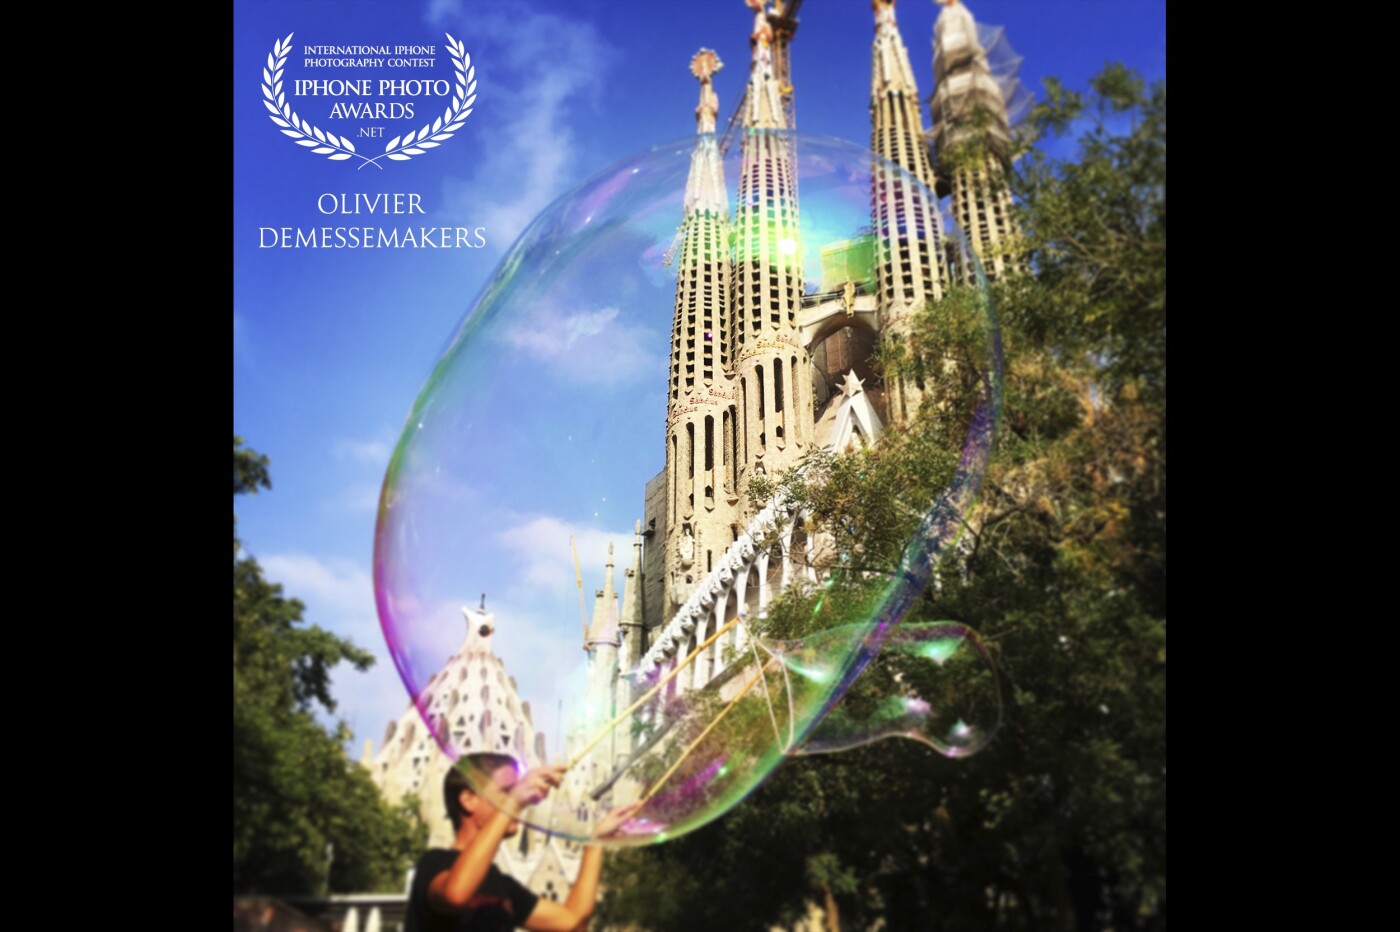 This picture was taken in Barcelona, Spain. The guy who was making these huge bubbles gave me the perfect decor to shoot Gaudi’s Sagrada Familia.